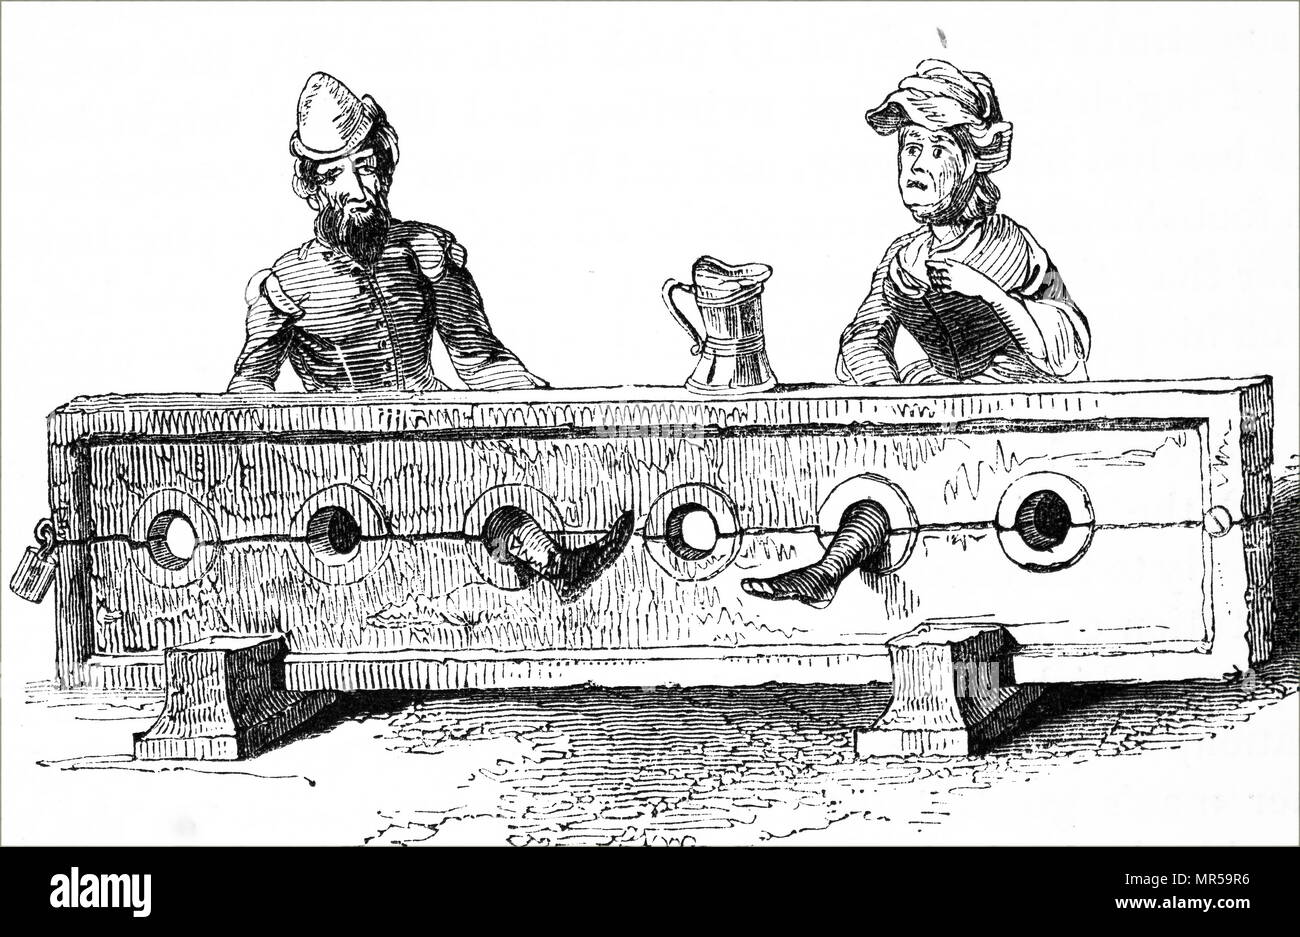 Engraving depicting a man and woman confined in the stocks as a form of public humiliation during the 15th century. Dated 19th century Stock Photo